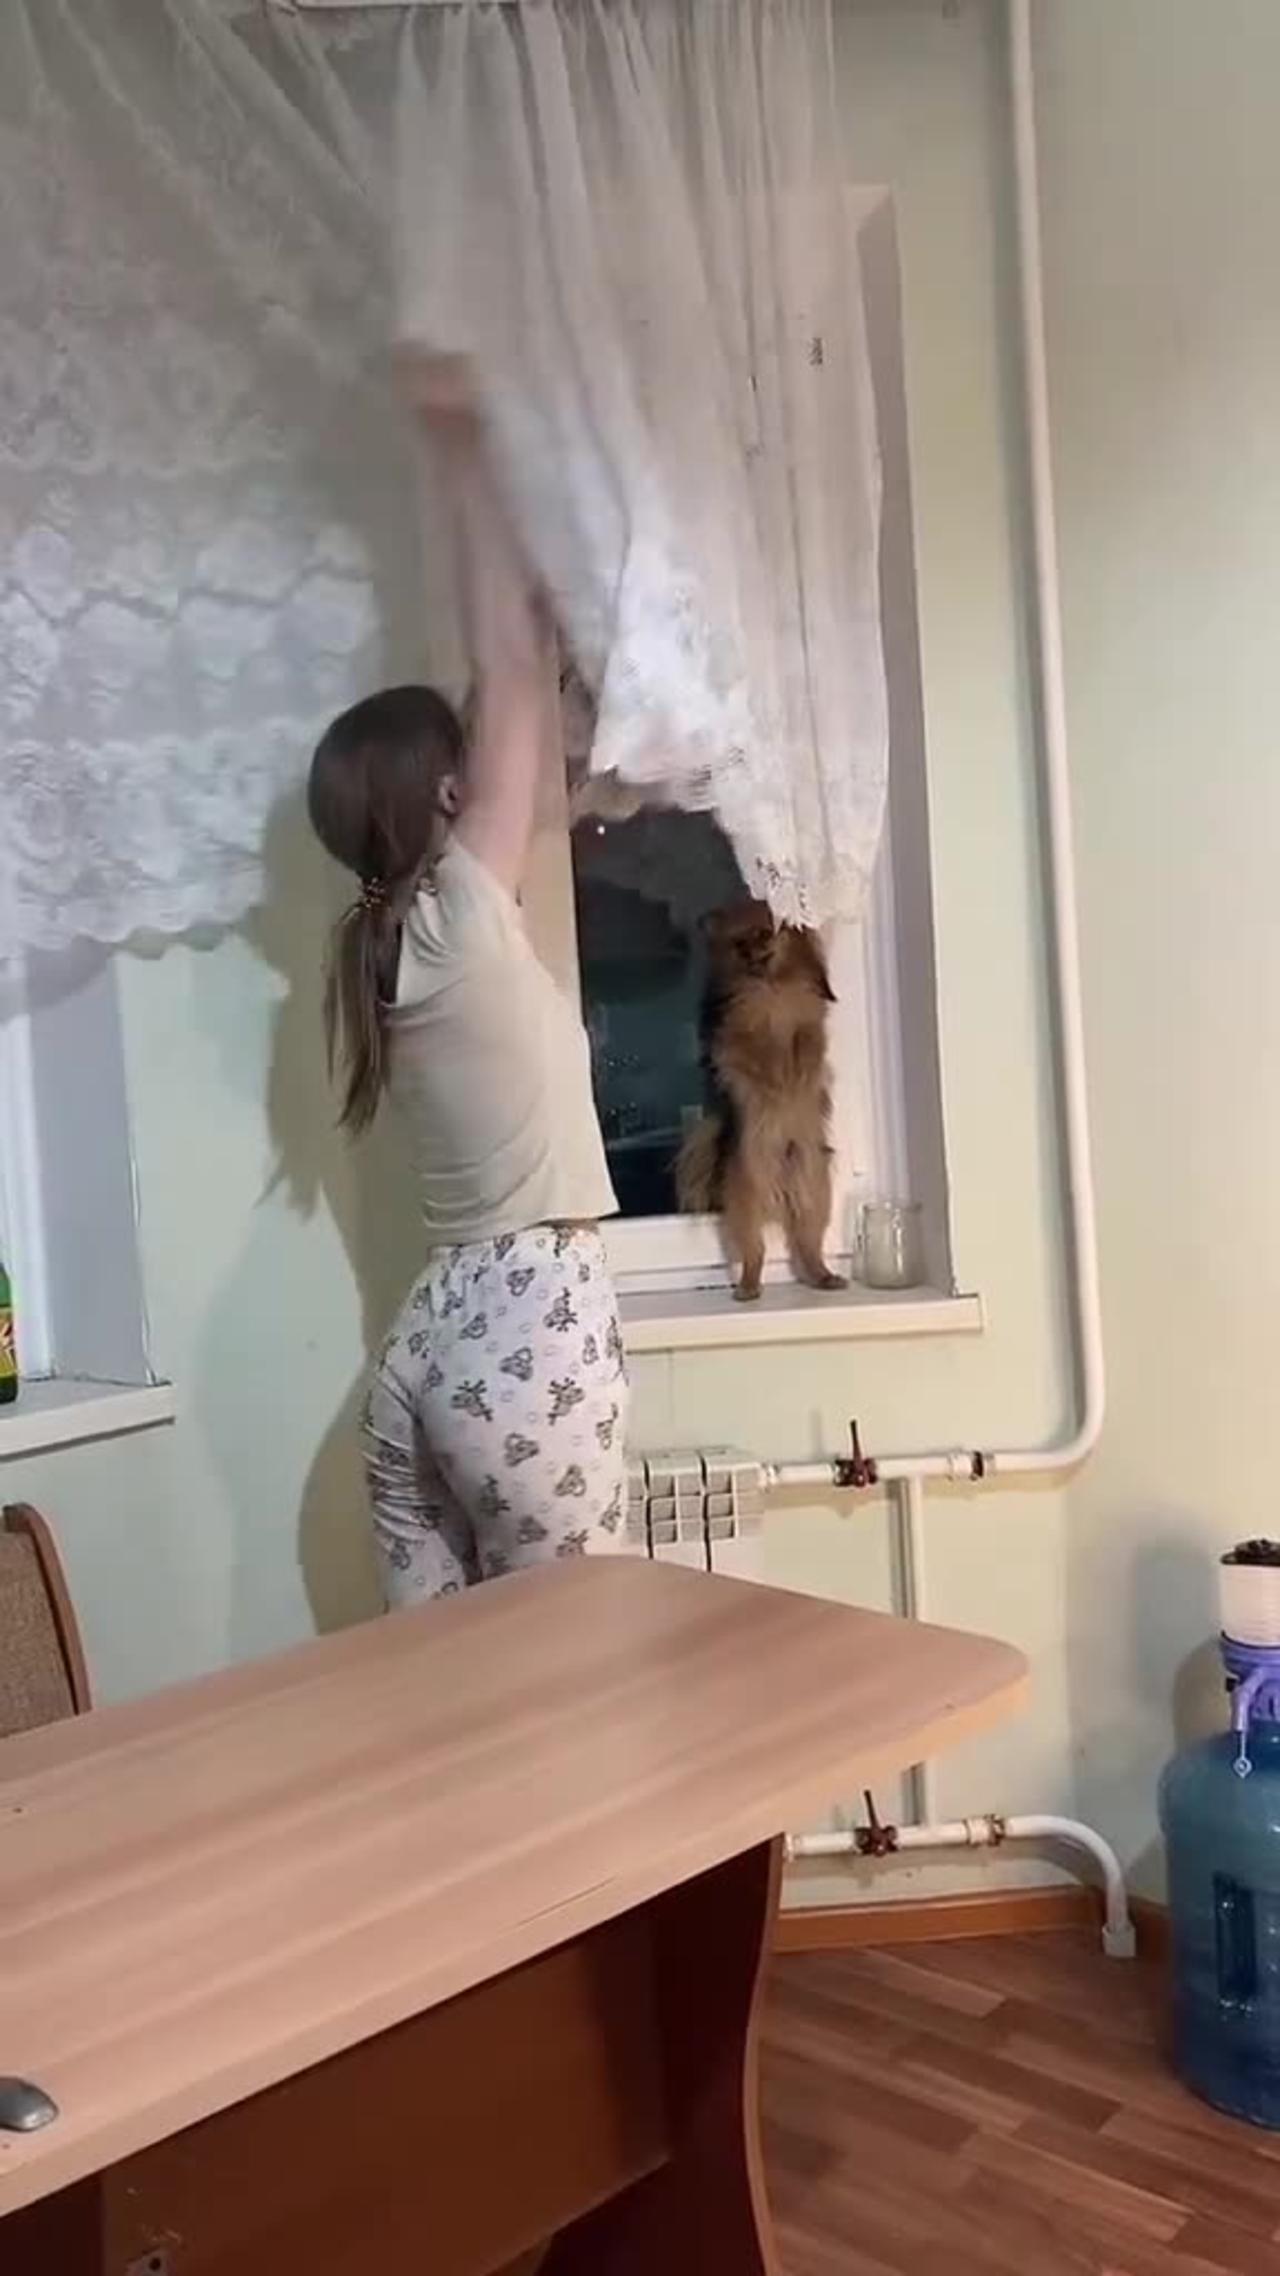 this woman wanted to reach the curtains but did not reach